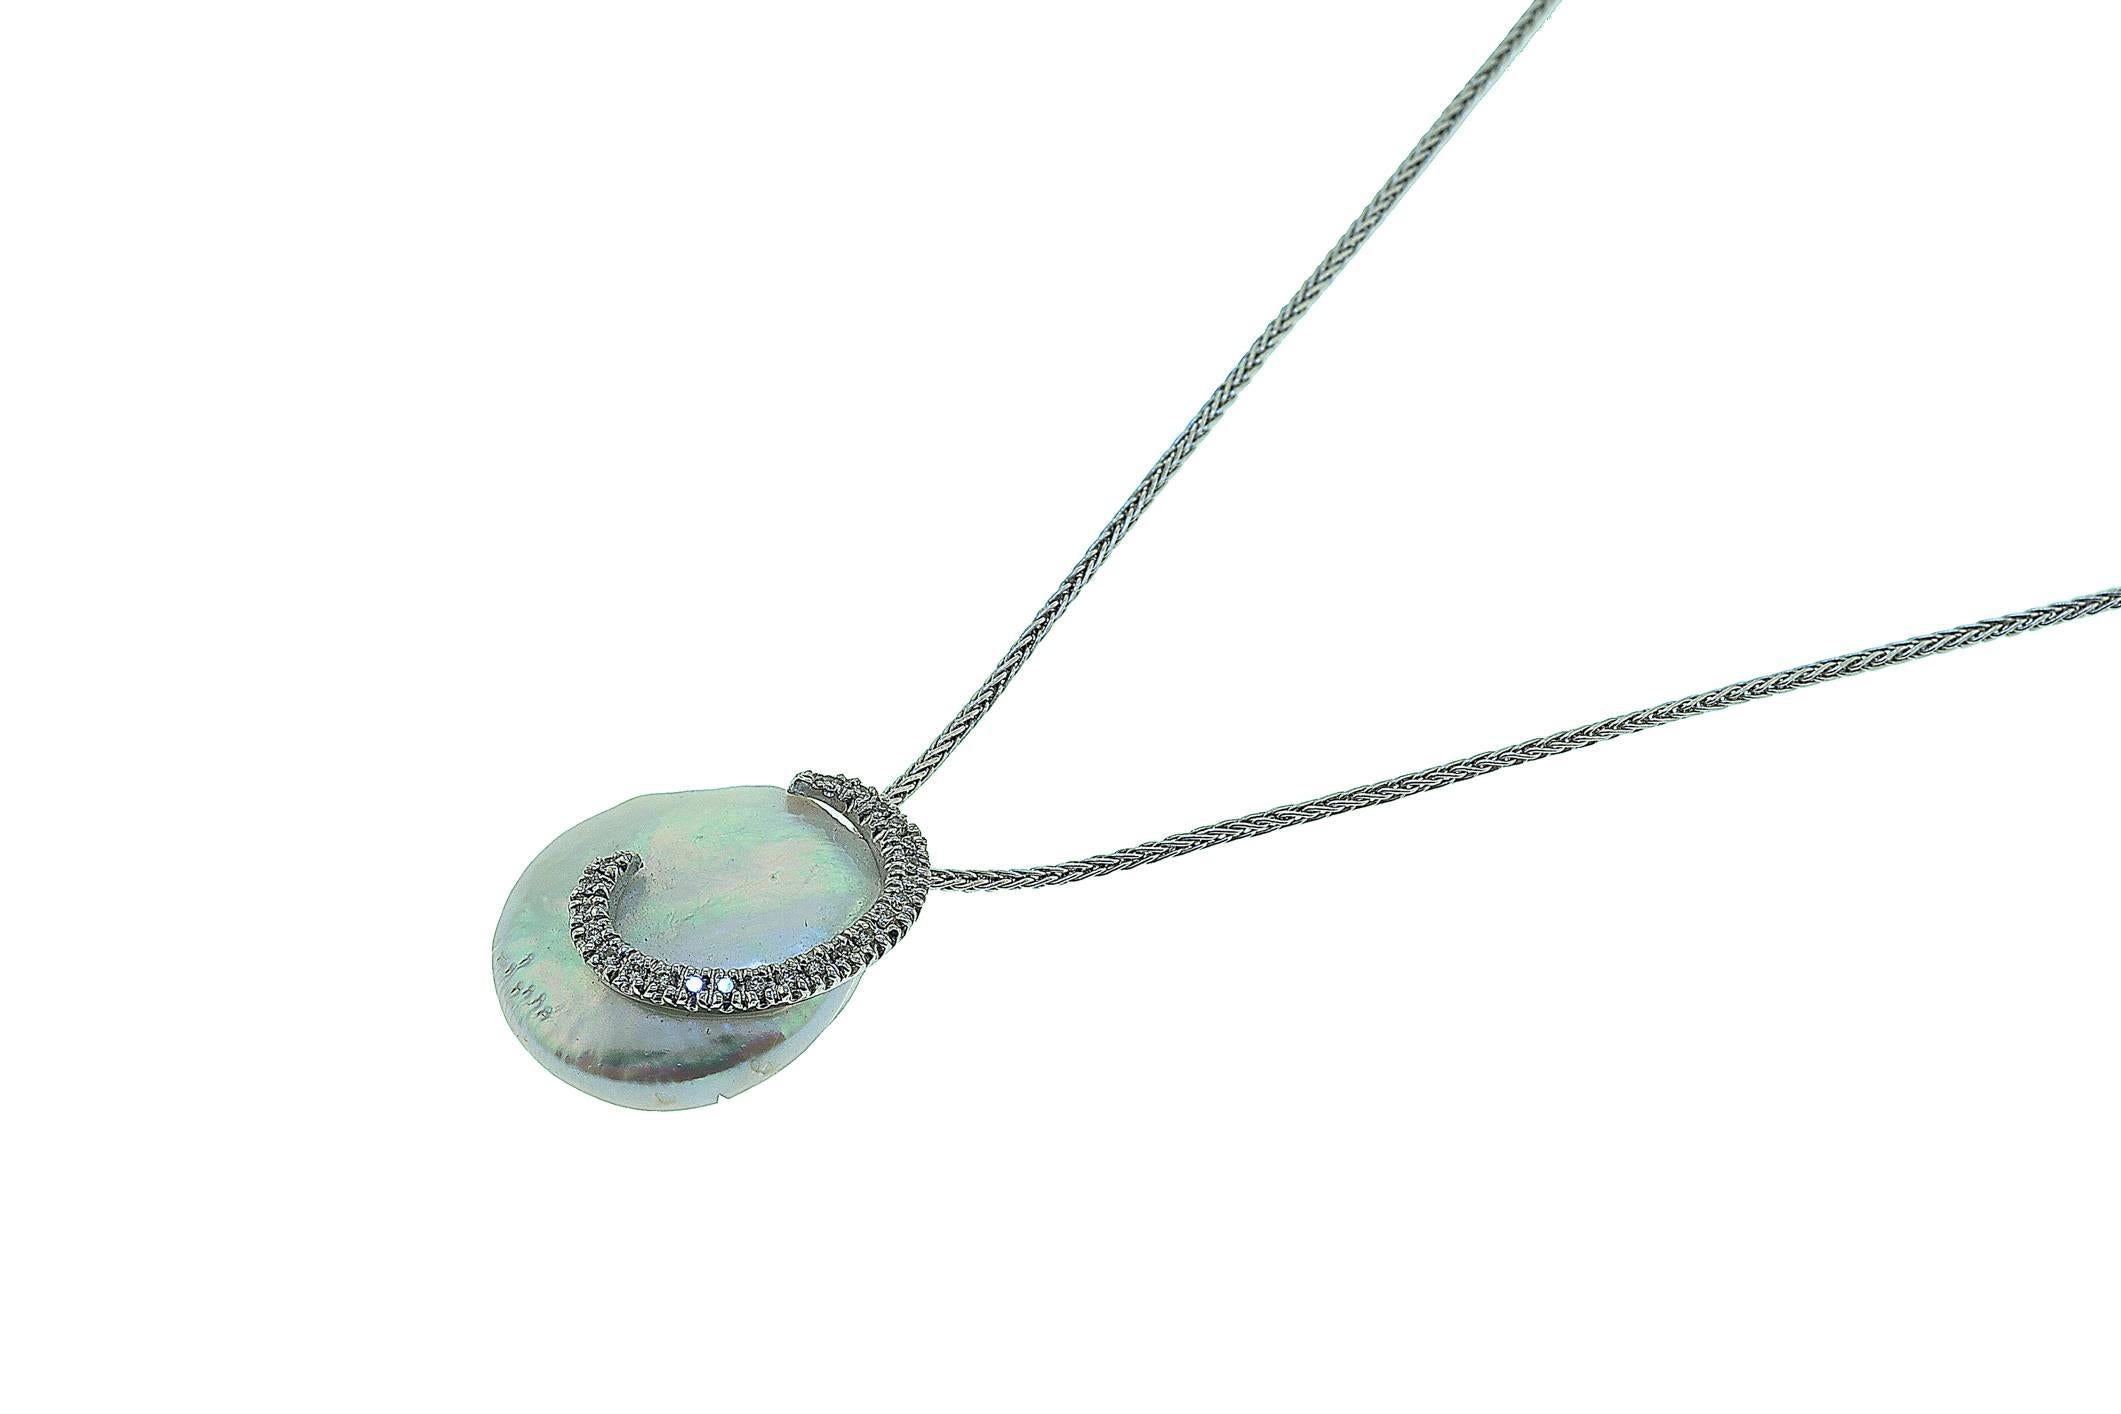 18K white gold Biwa pearl with diamond swirl. The diamonds weigh combined 0.26 carat. The pendant hangs on a 16